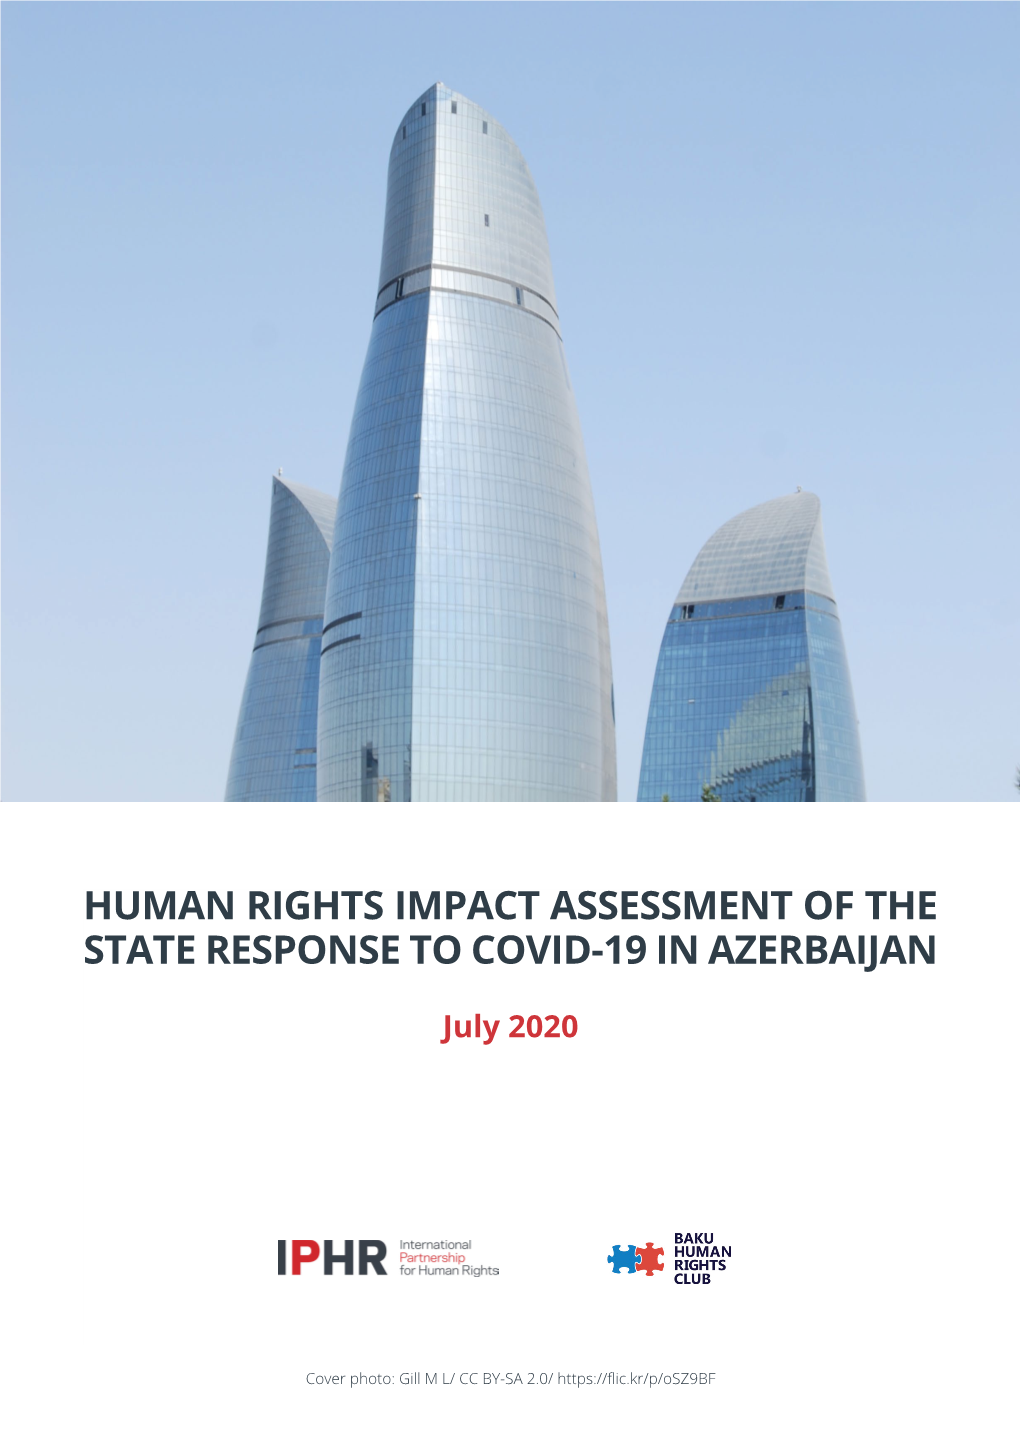 Human Rights Impact Assessment of the State Response to Covid-19 in Azerbaijan